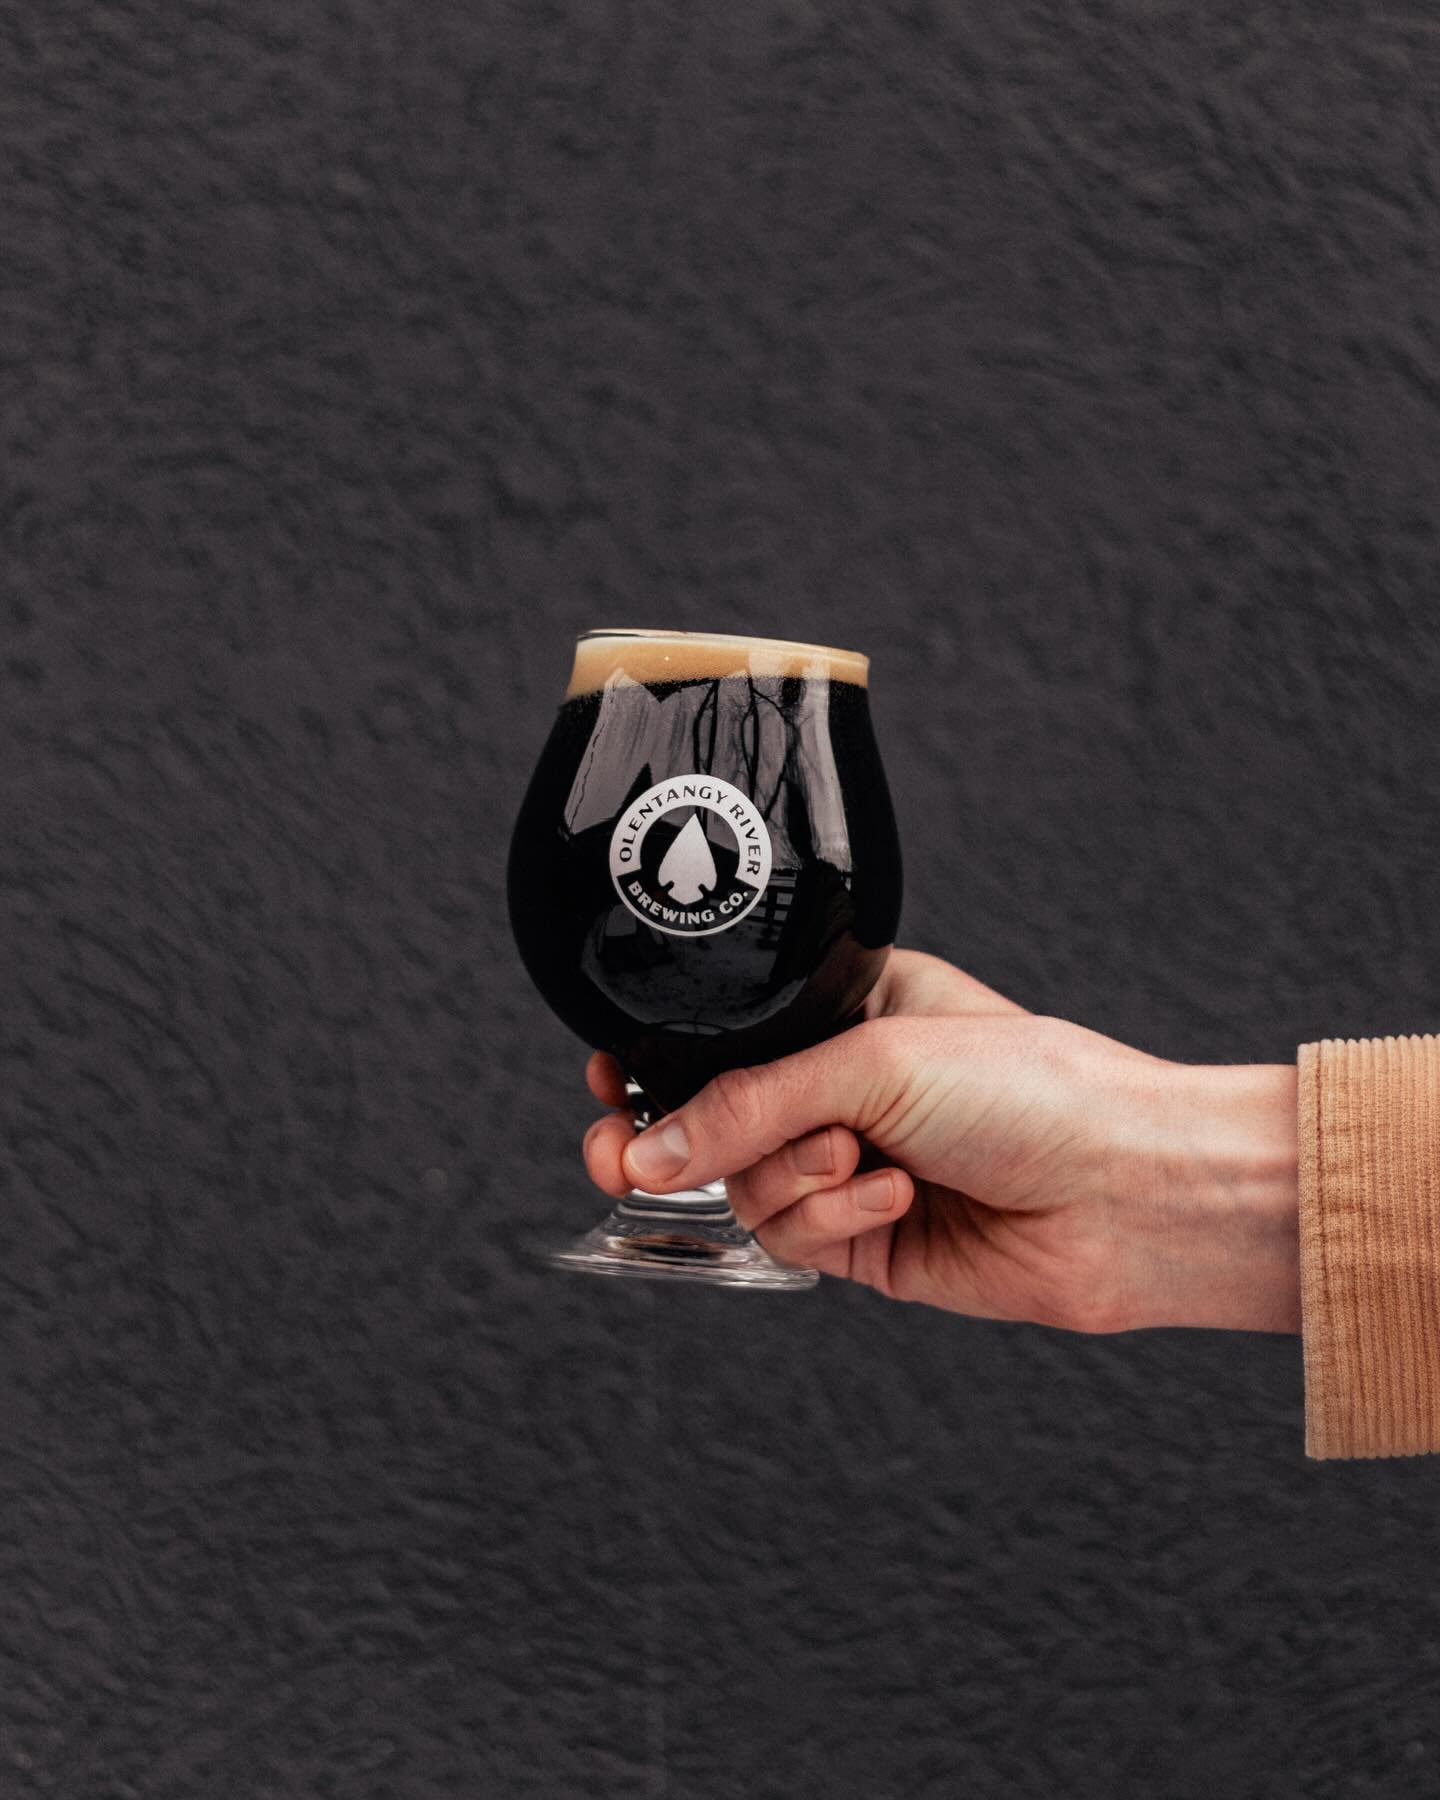 Introducing our newest stout, River Dragon! Made in collaboration with @dragonstoneabbey1, this imperial stout is creamy and chocolate-y, and plenty smooth. 
Grab a pint today, because once it&rsquo;s gone, it won&rsquo;t be back&hellip;
until Novemb